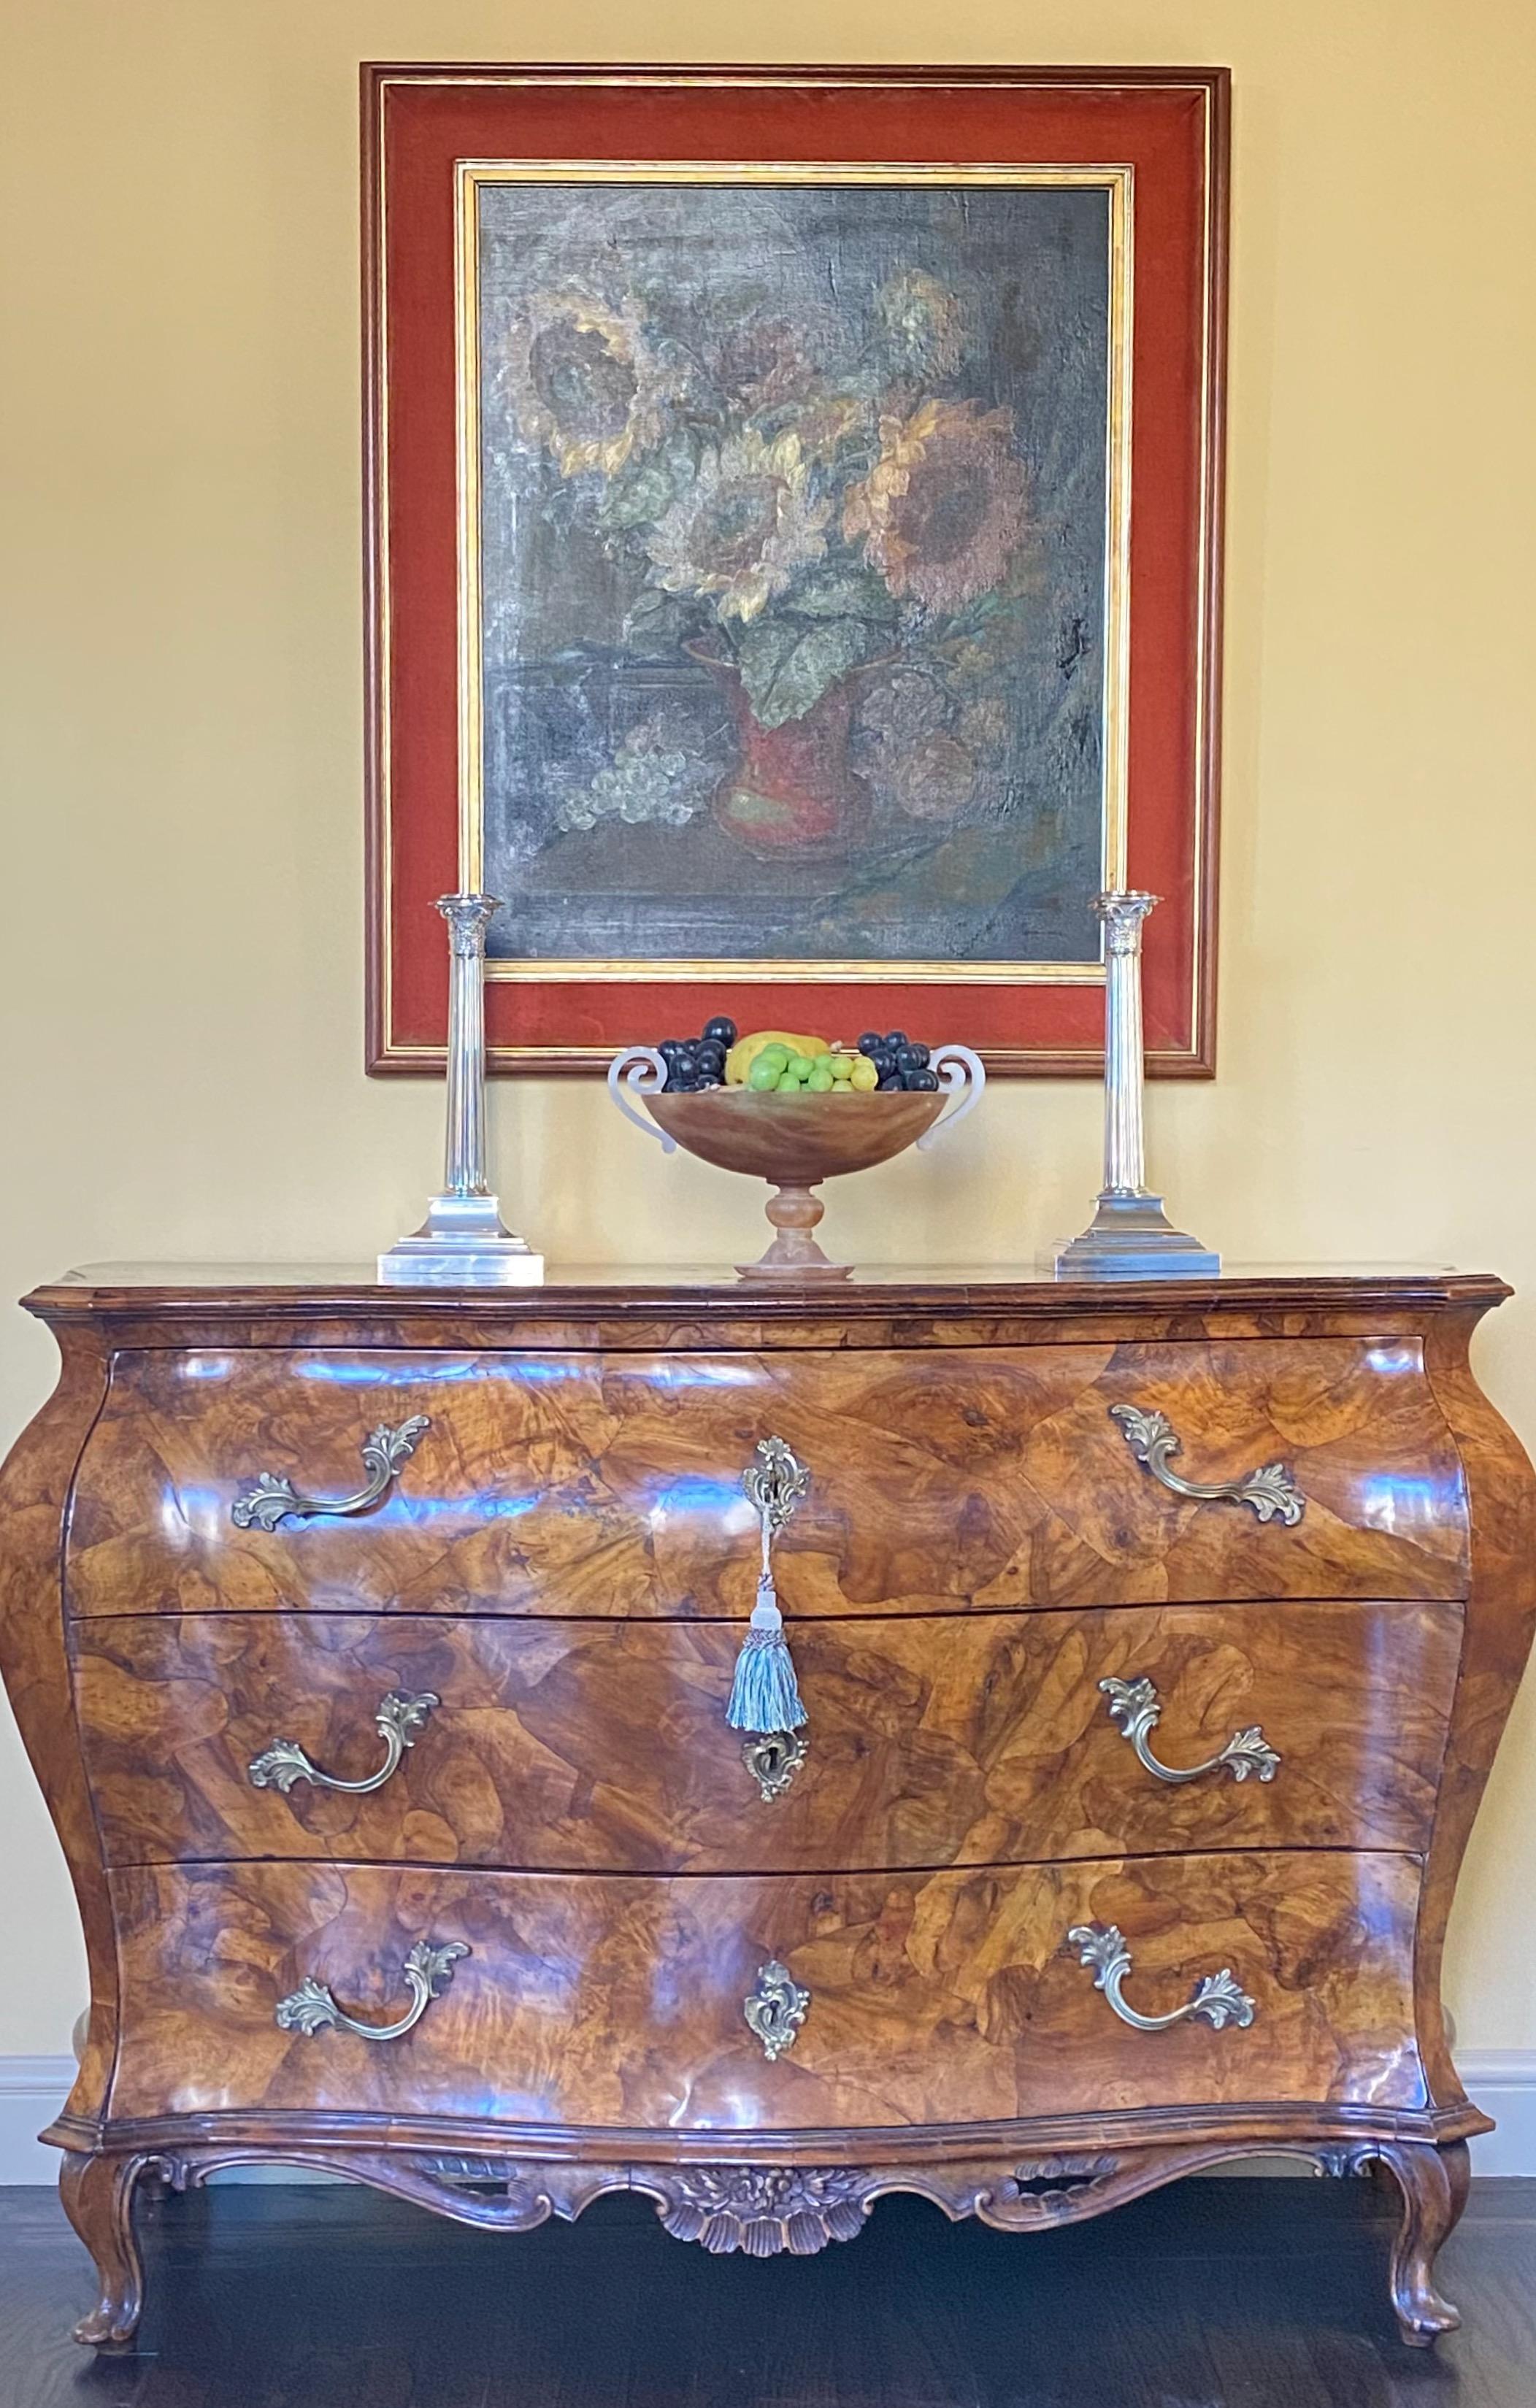 An exceptional early 19th century Italian walnut patchwork veneered chest in excellent antique condition. Entire commode with highly figural patchwork walnut , having original locks, keys, and hardware. 
All three drawers are paper lined and move